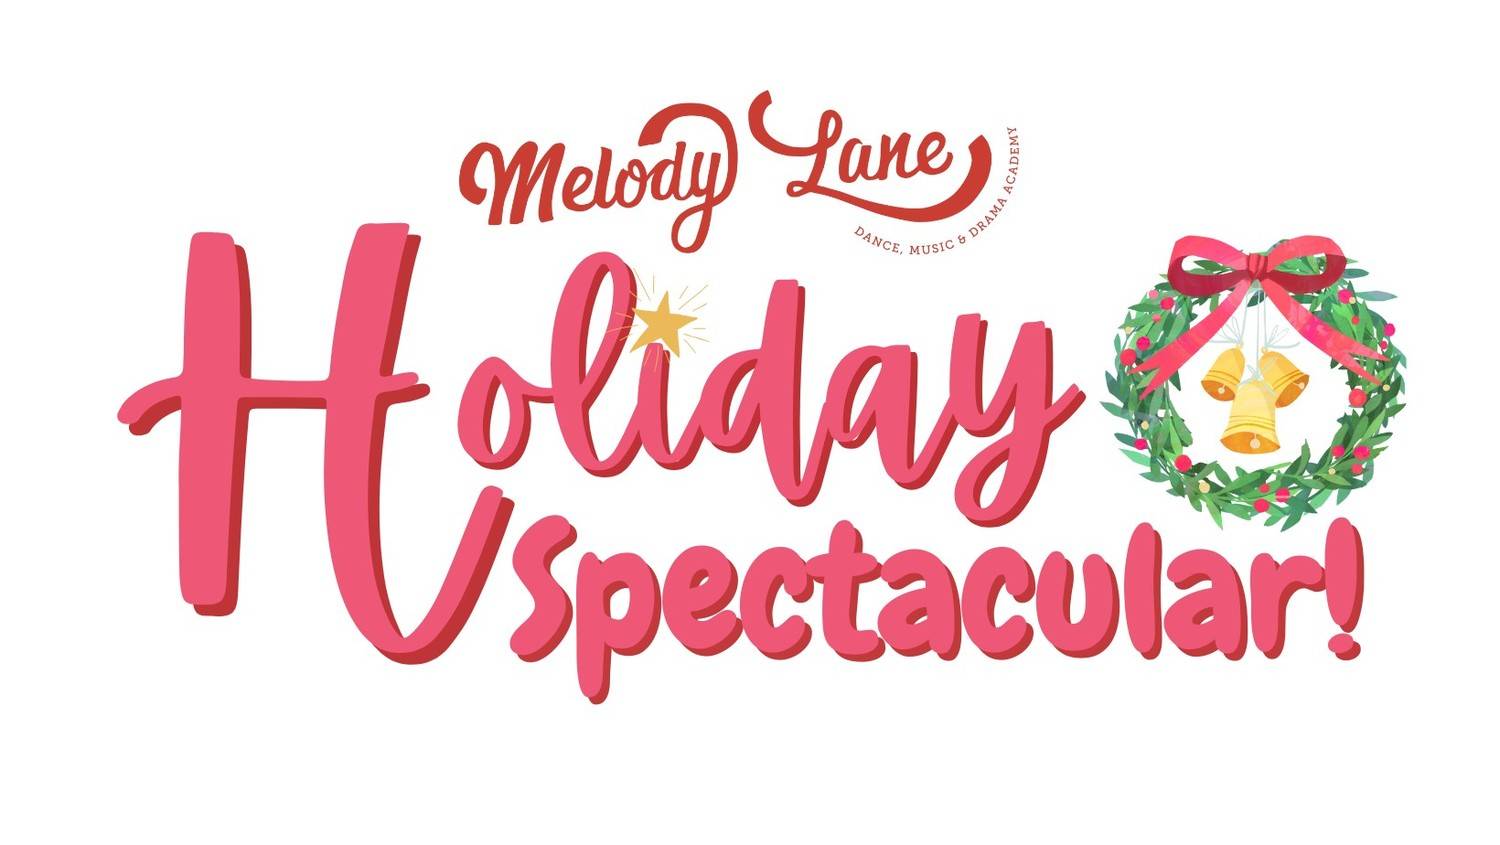 Melody Lane Academy's Holiday Spectacular